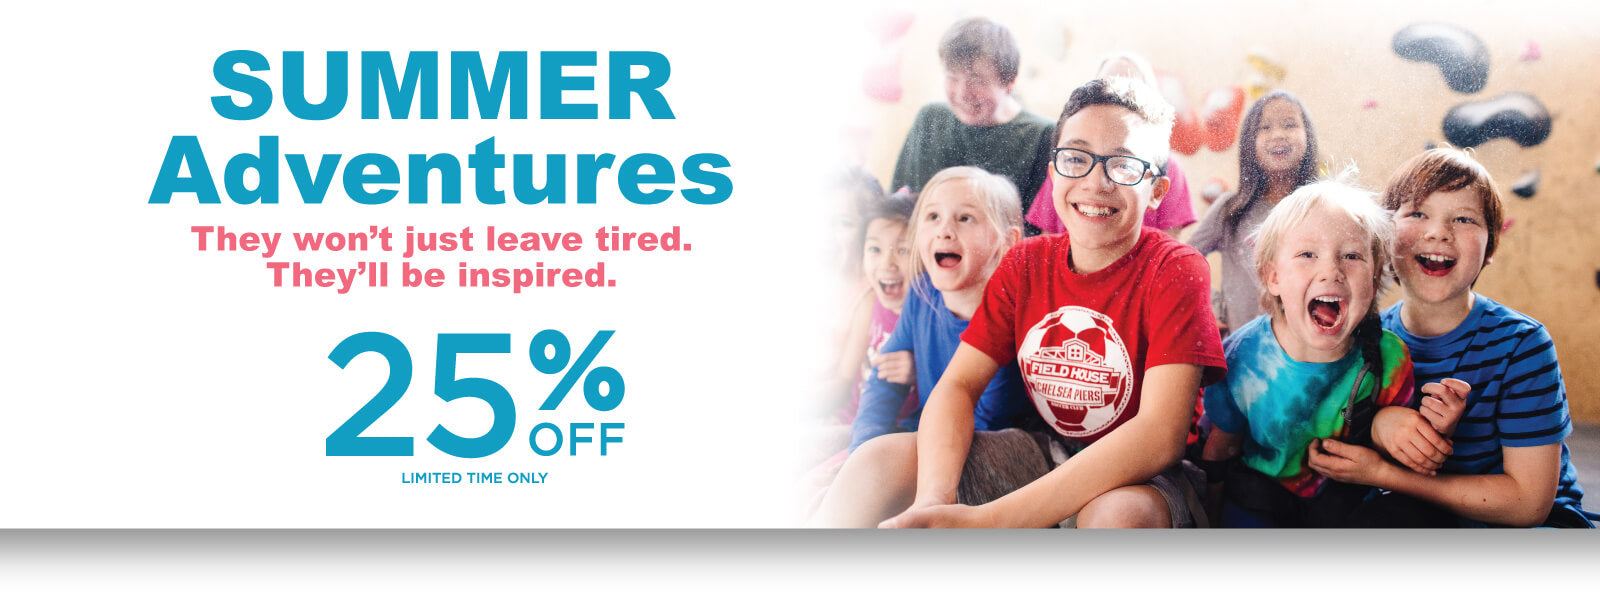 Summer Adventures. They won't just leave tired. they'll be inspired. 25% Off Limited time only!